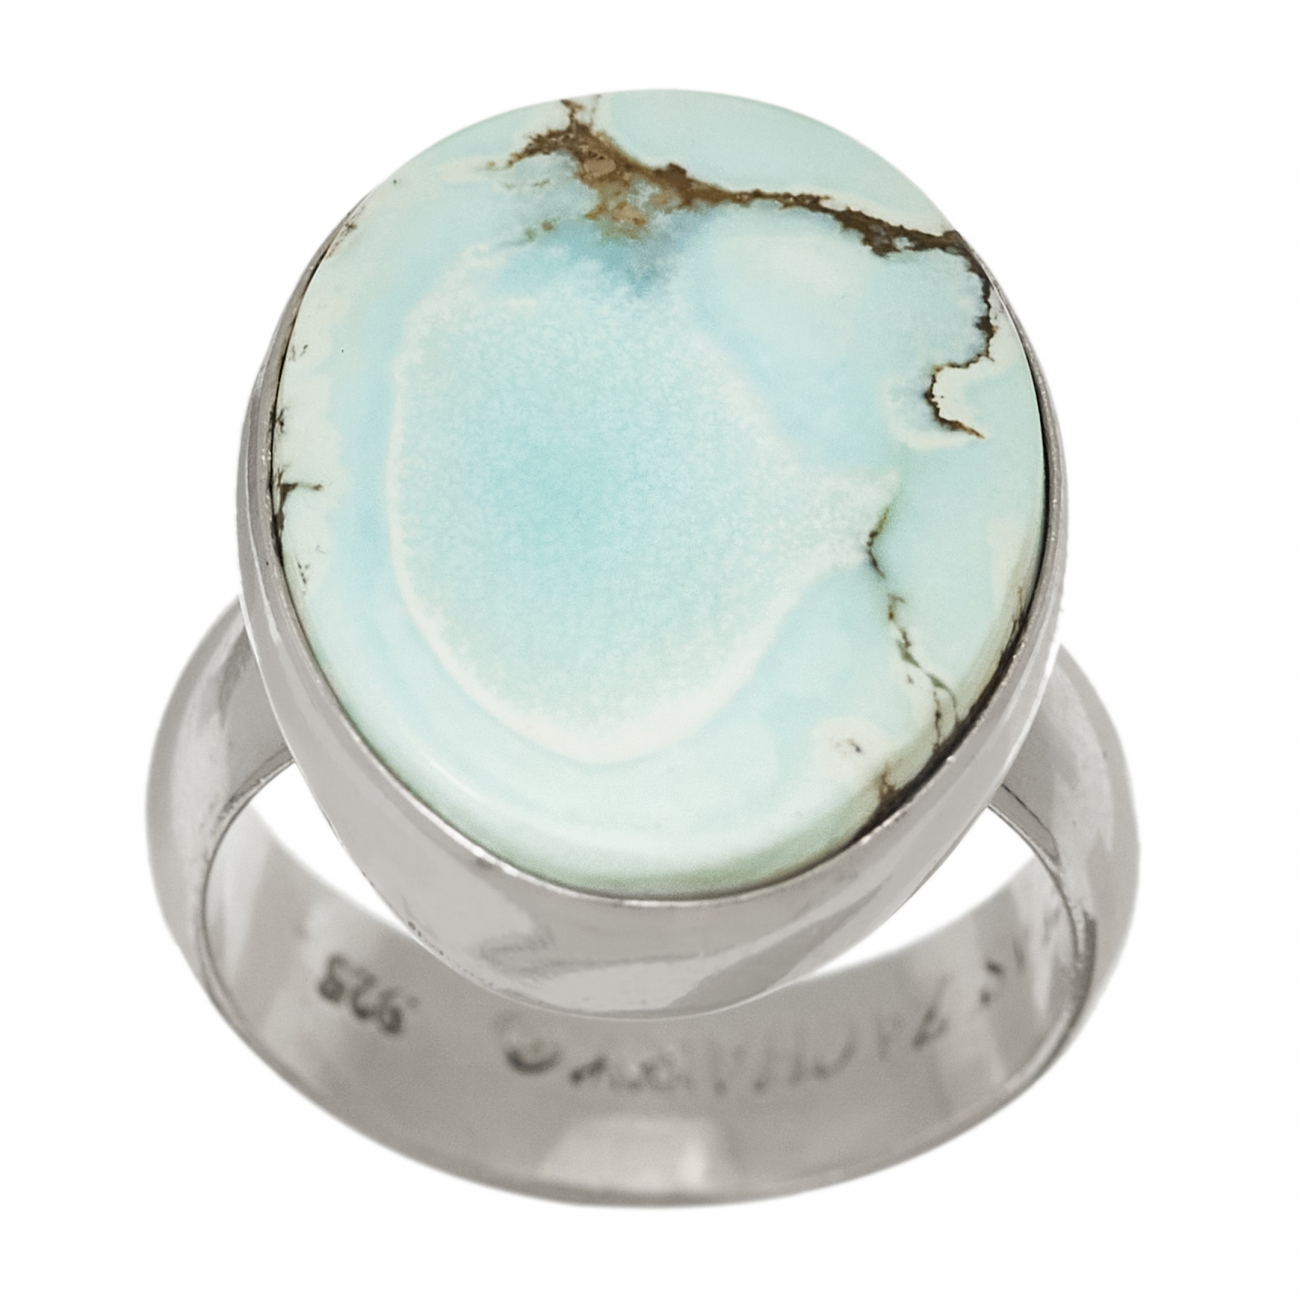 Ring BA1301 in turquoise and silver - Harpo Paris